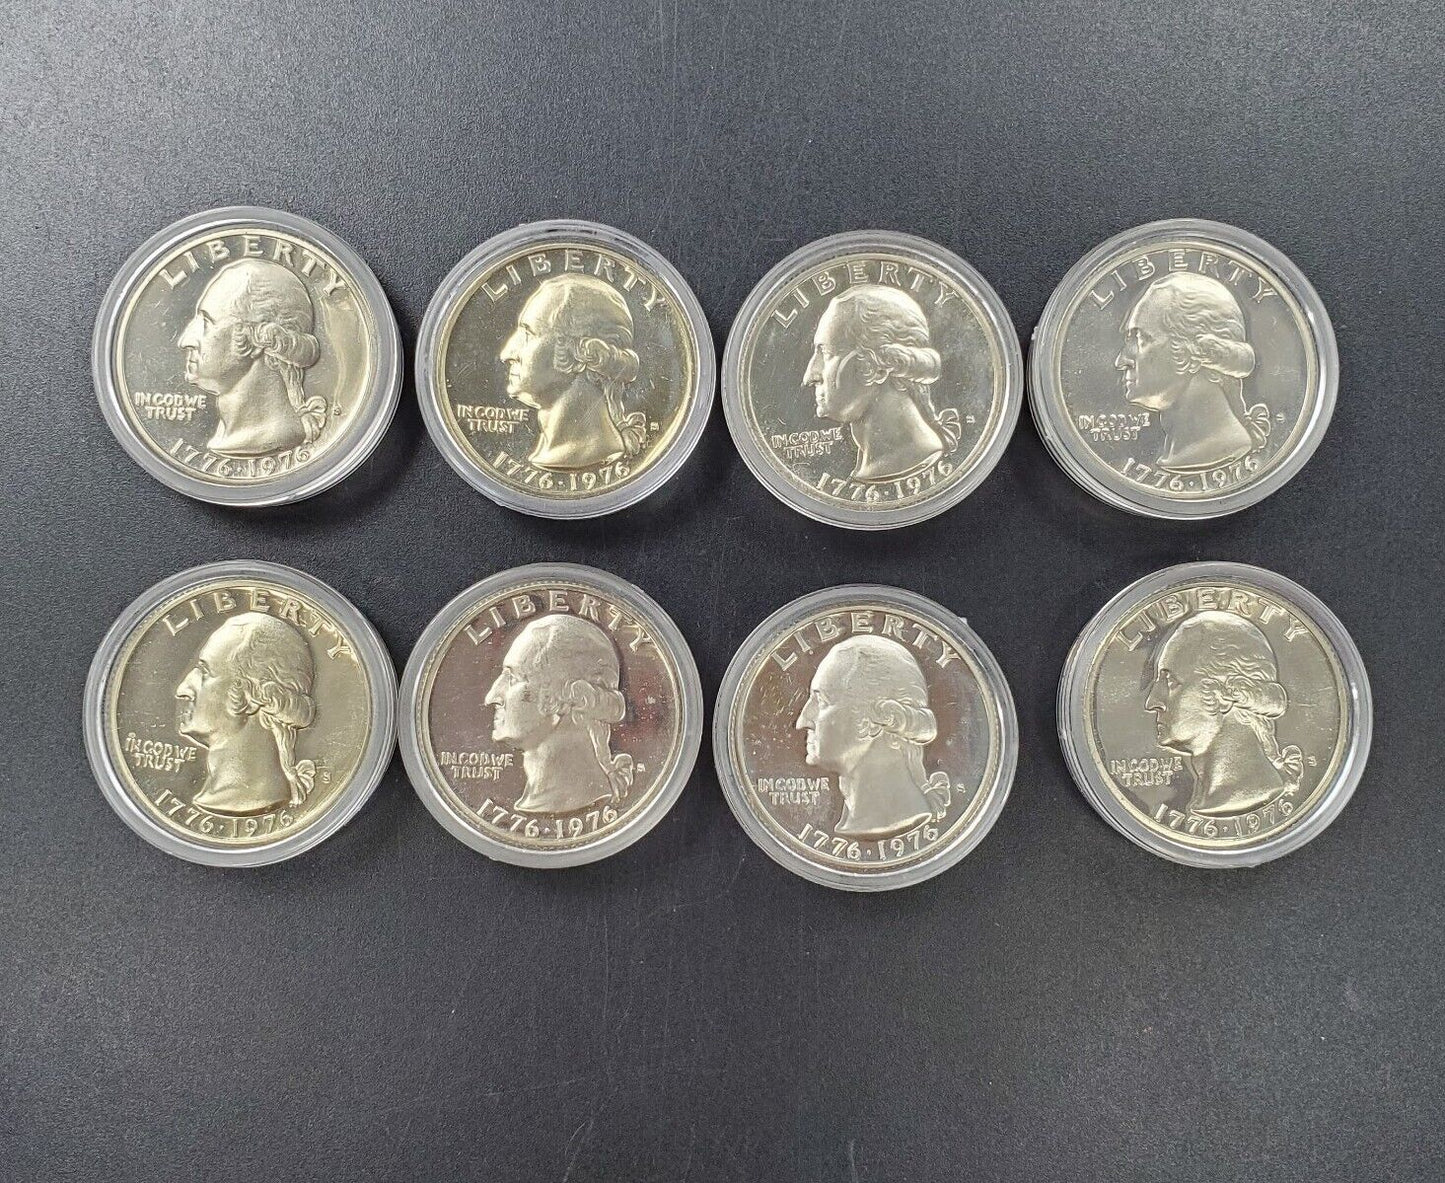 Lot of 8 1976 S Proof Washington Silver Quarter Bicentennial Coins in Capsules